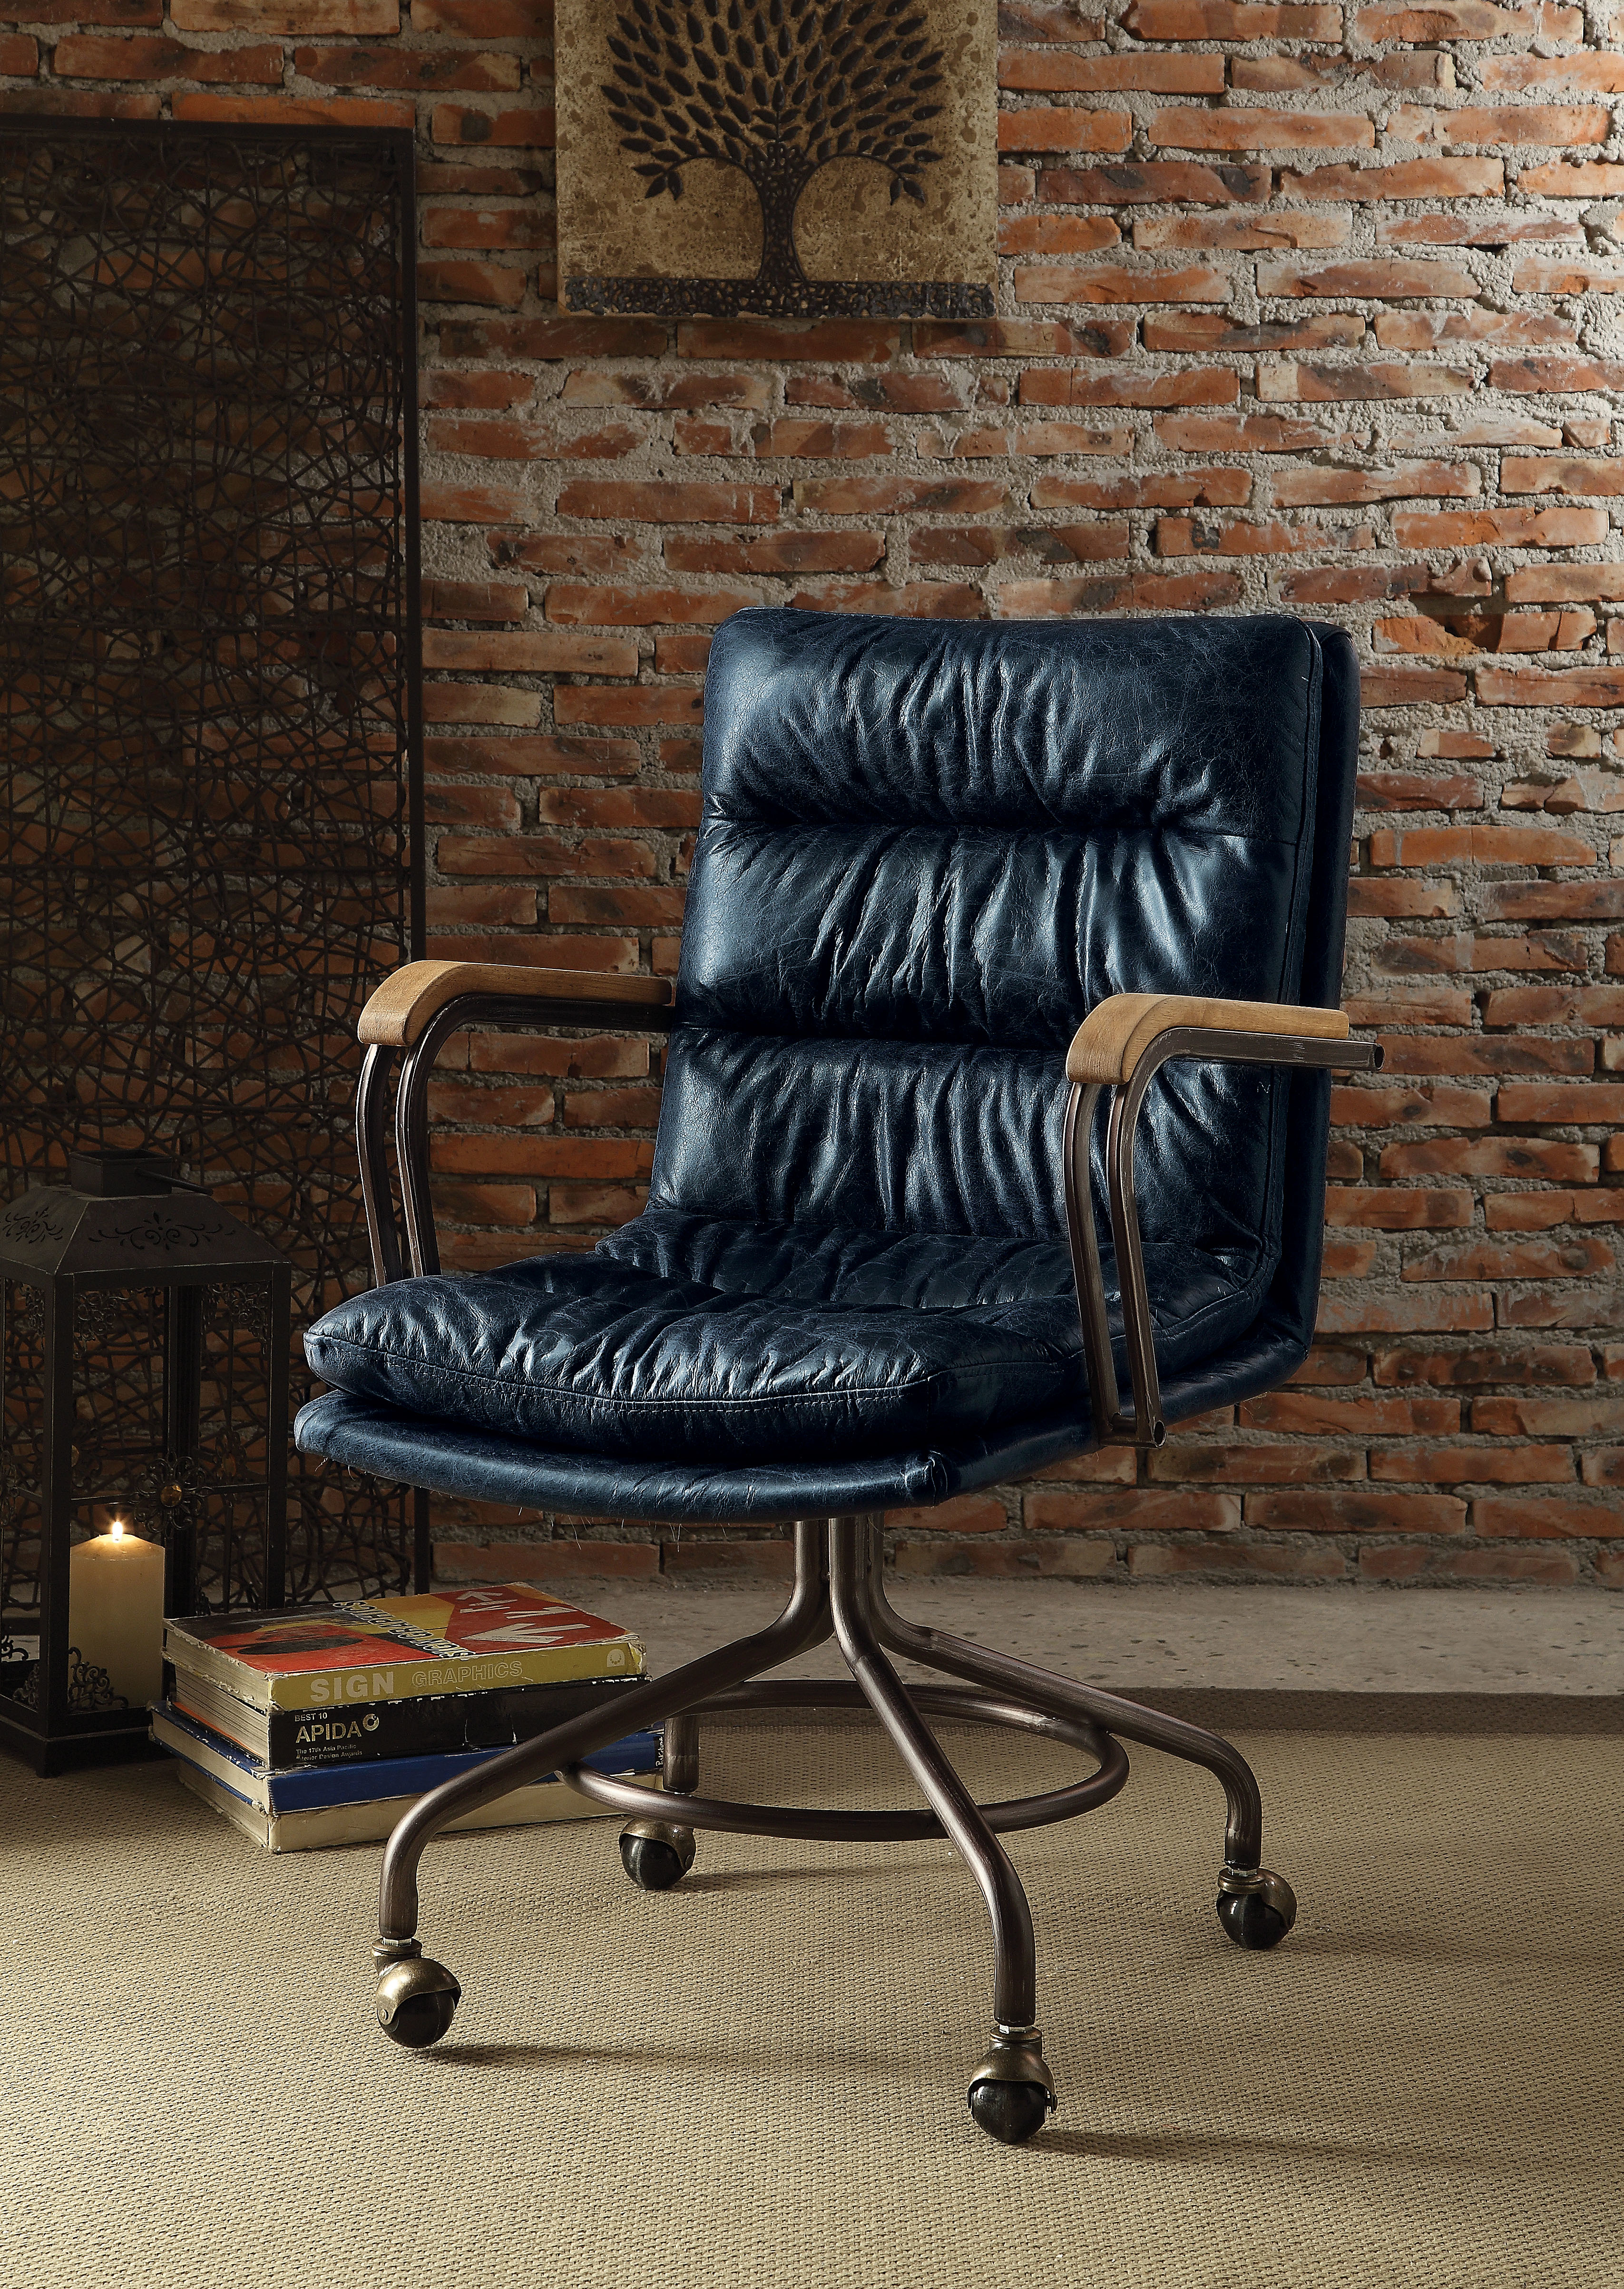 Metal & Leather Executive Office Chair, Vintage Blue